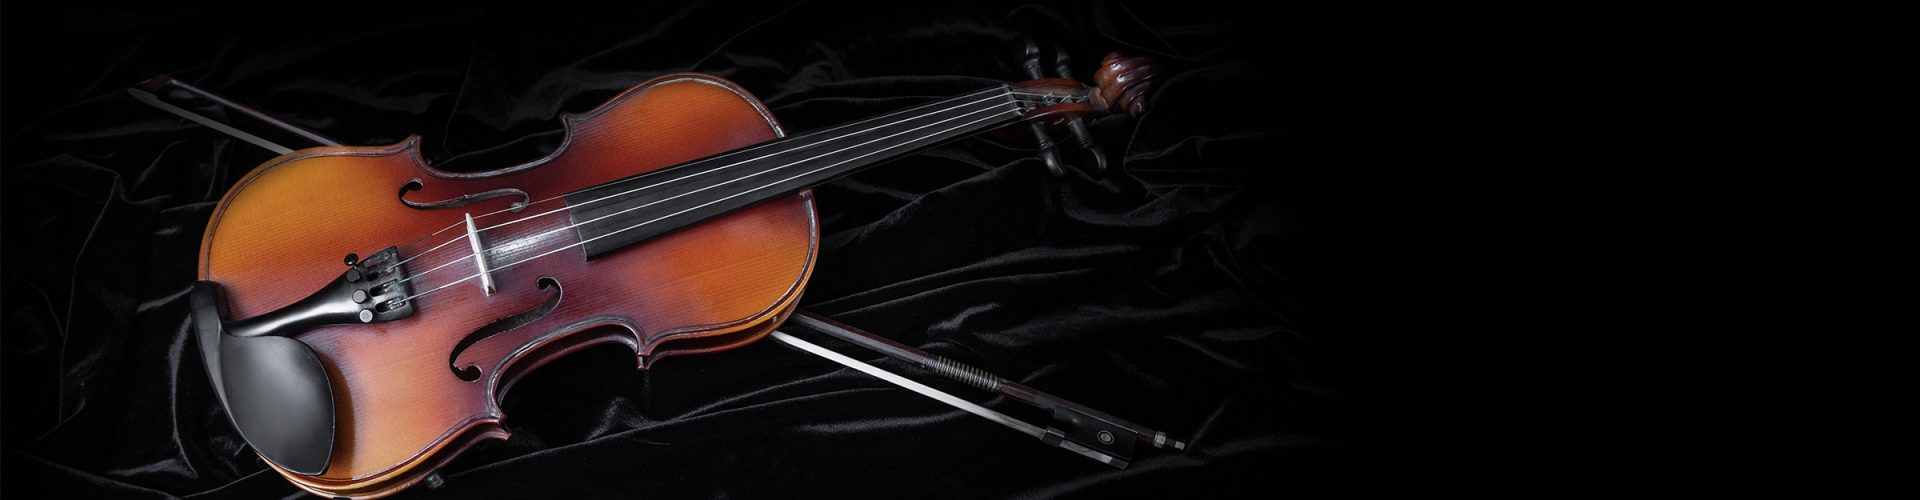 A violin and bow